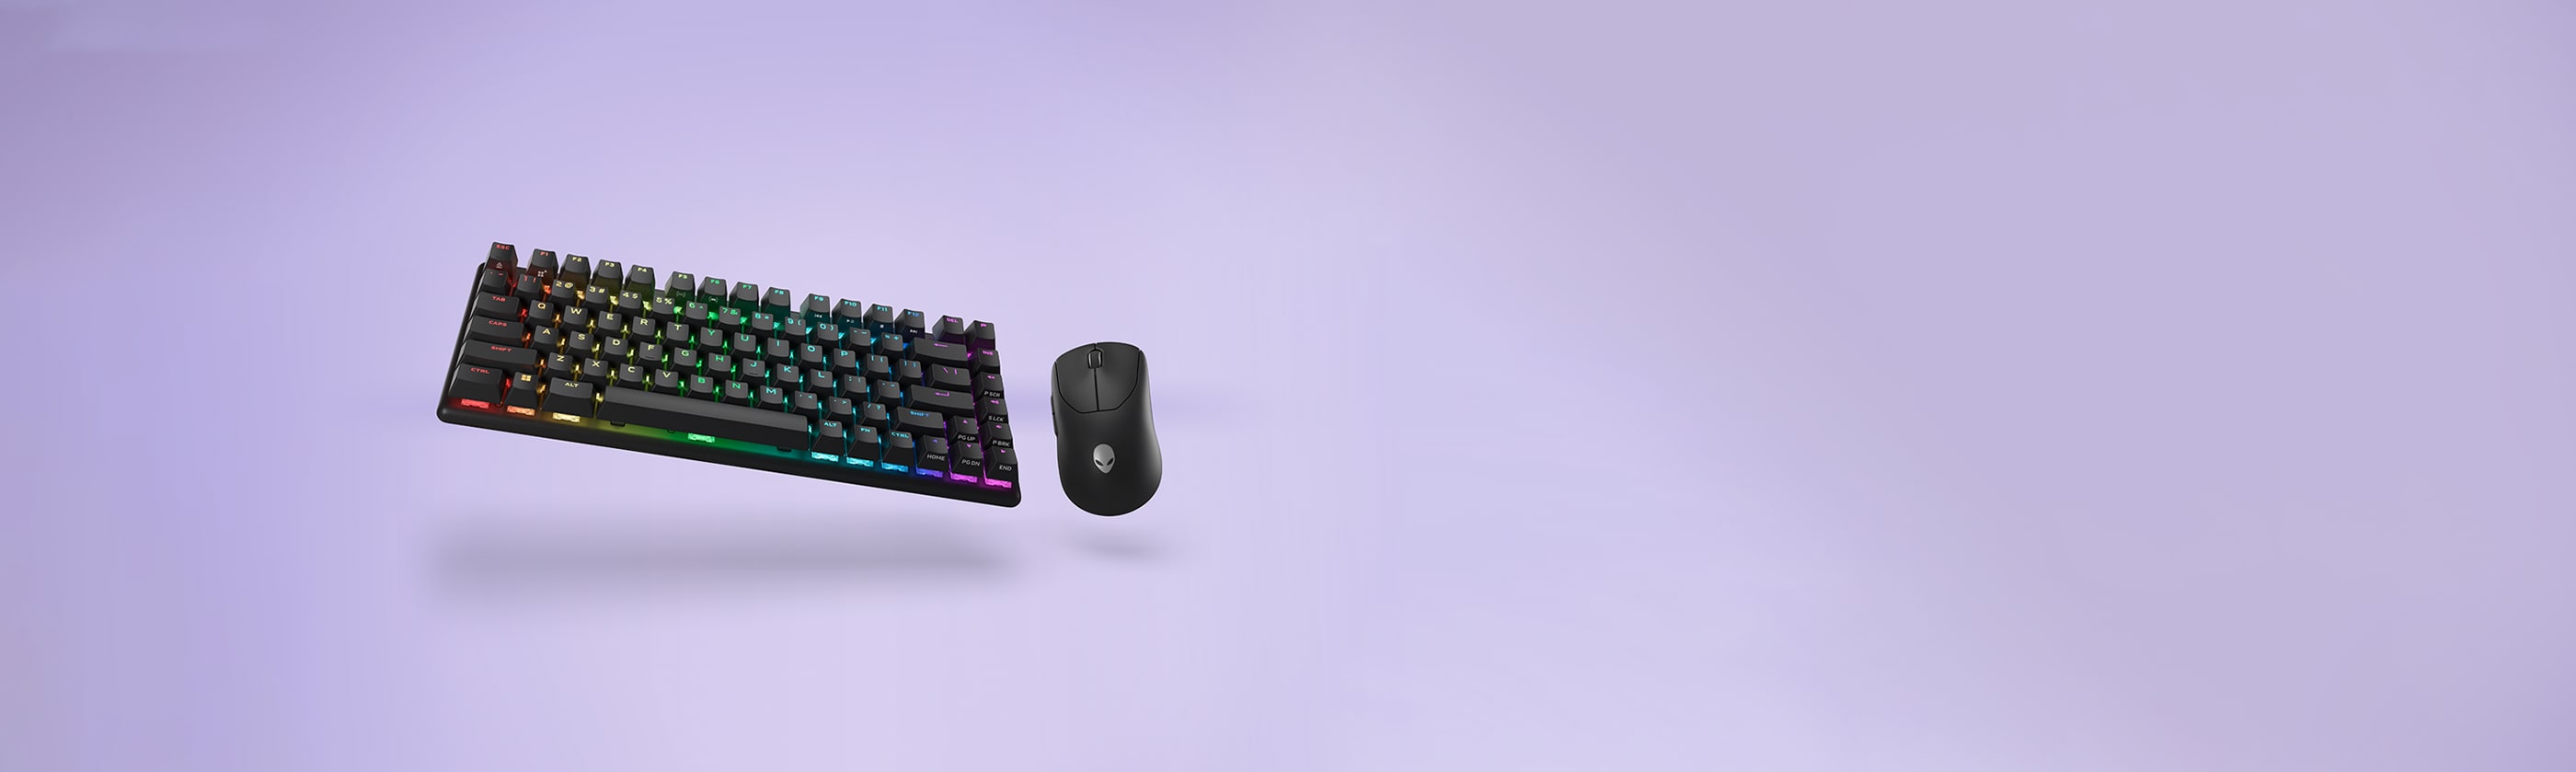 Alienware keyboard and mouse.